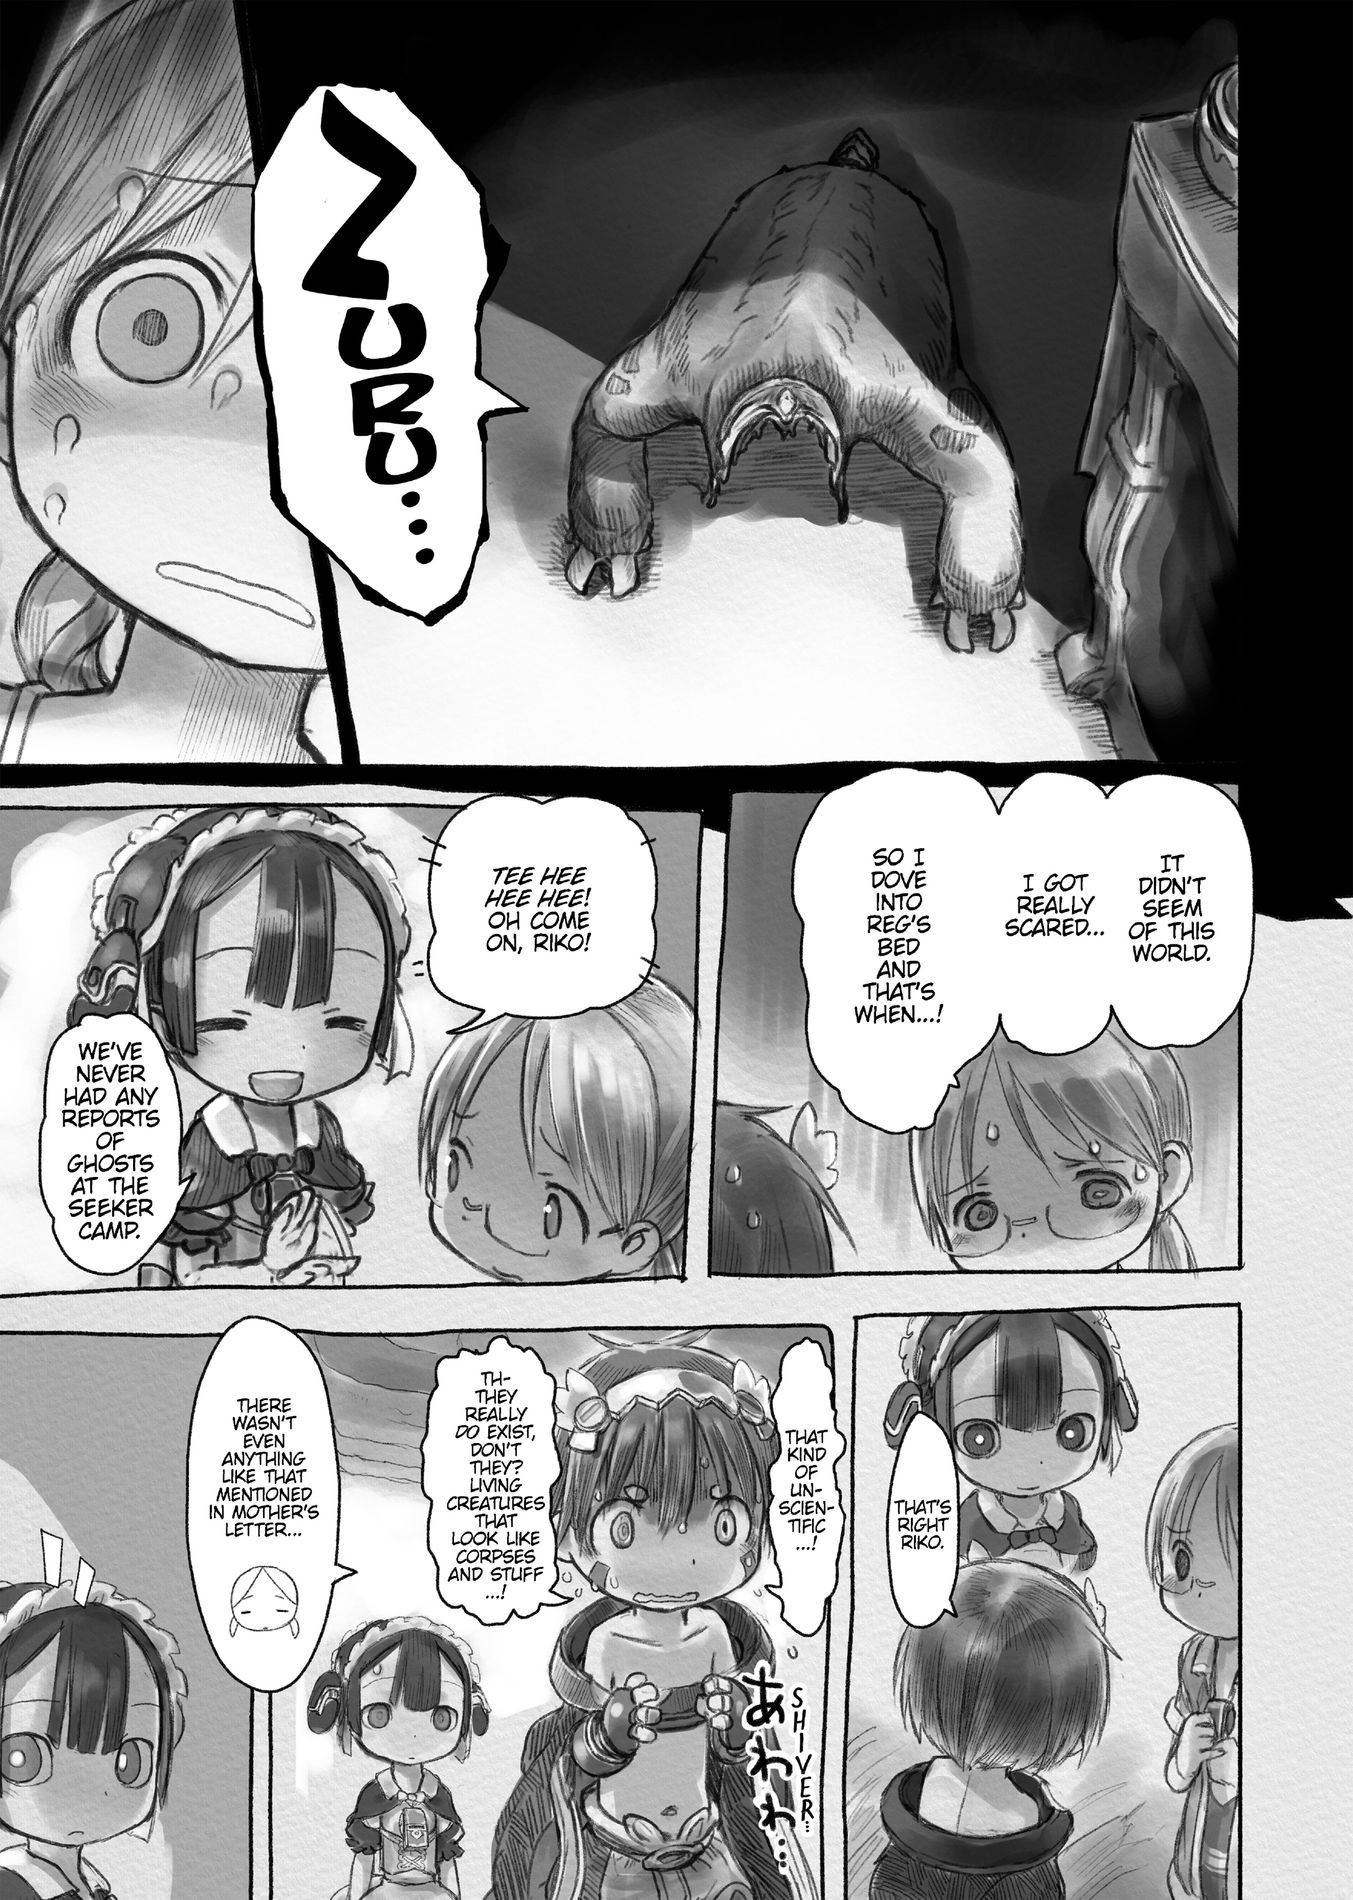 Made In Abyss - Chapter 14 - Made in Abyss Manga Online